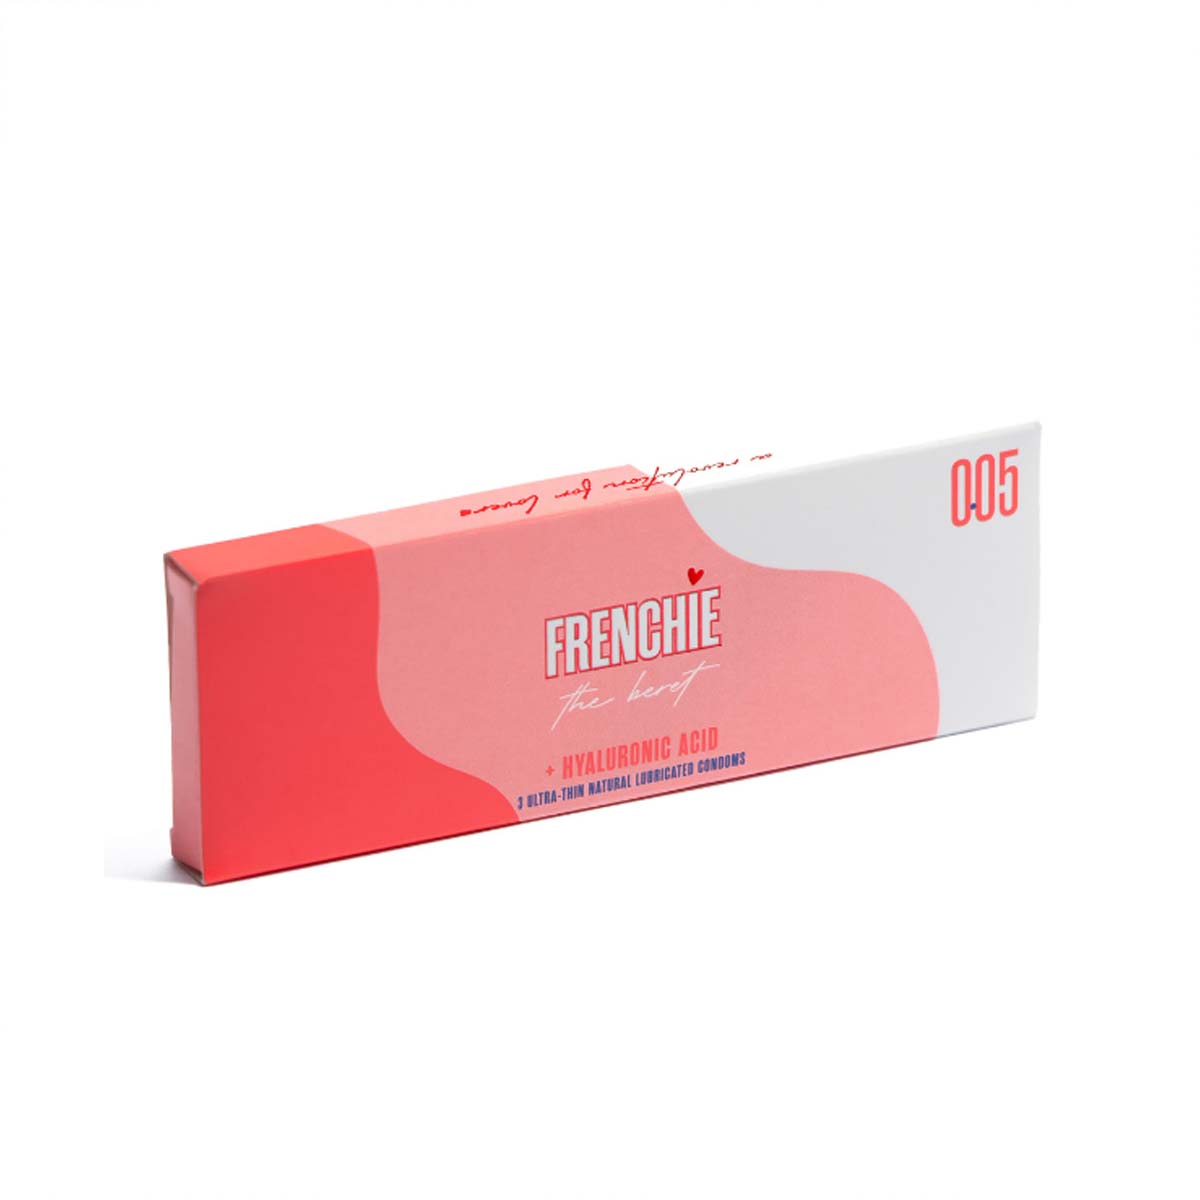 Red and white box of Frenchie vegan condoms with Hylaronic Acid Nudie Co